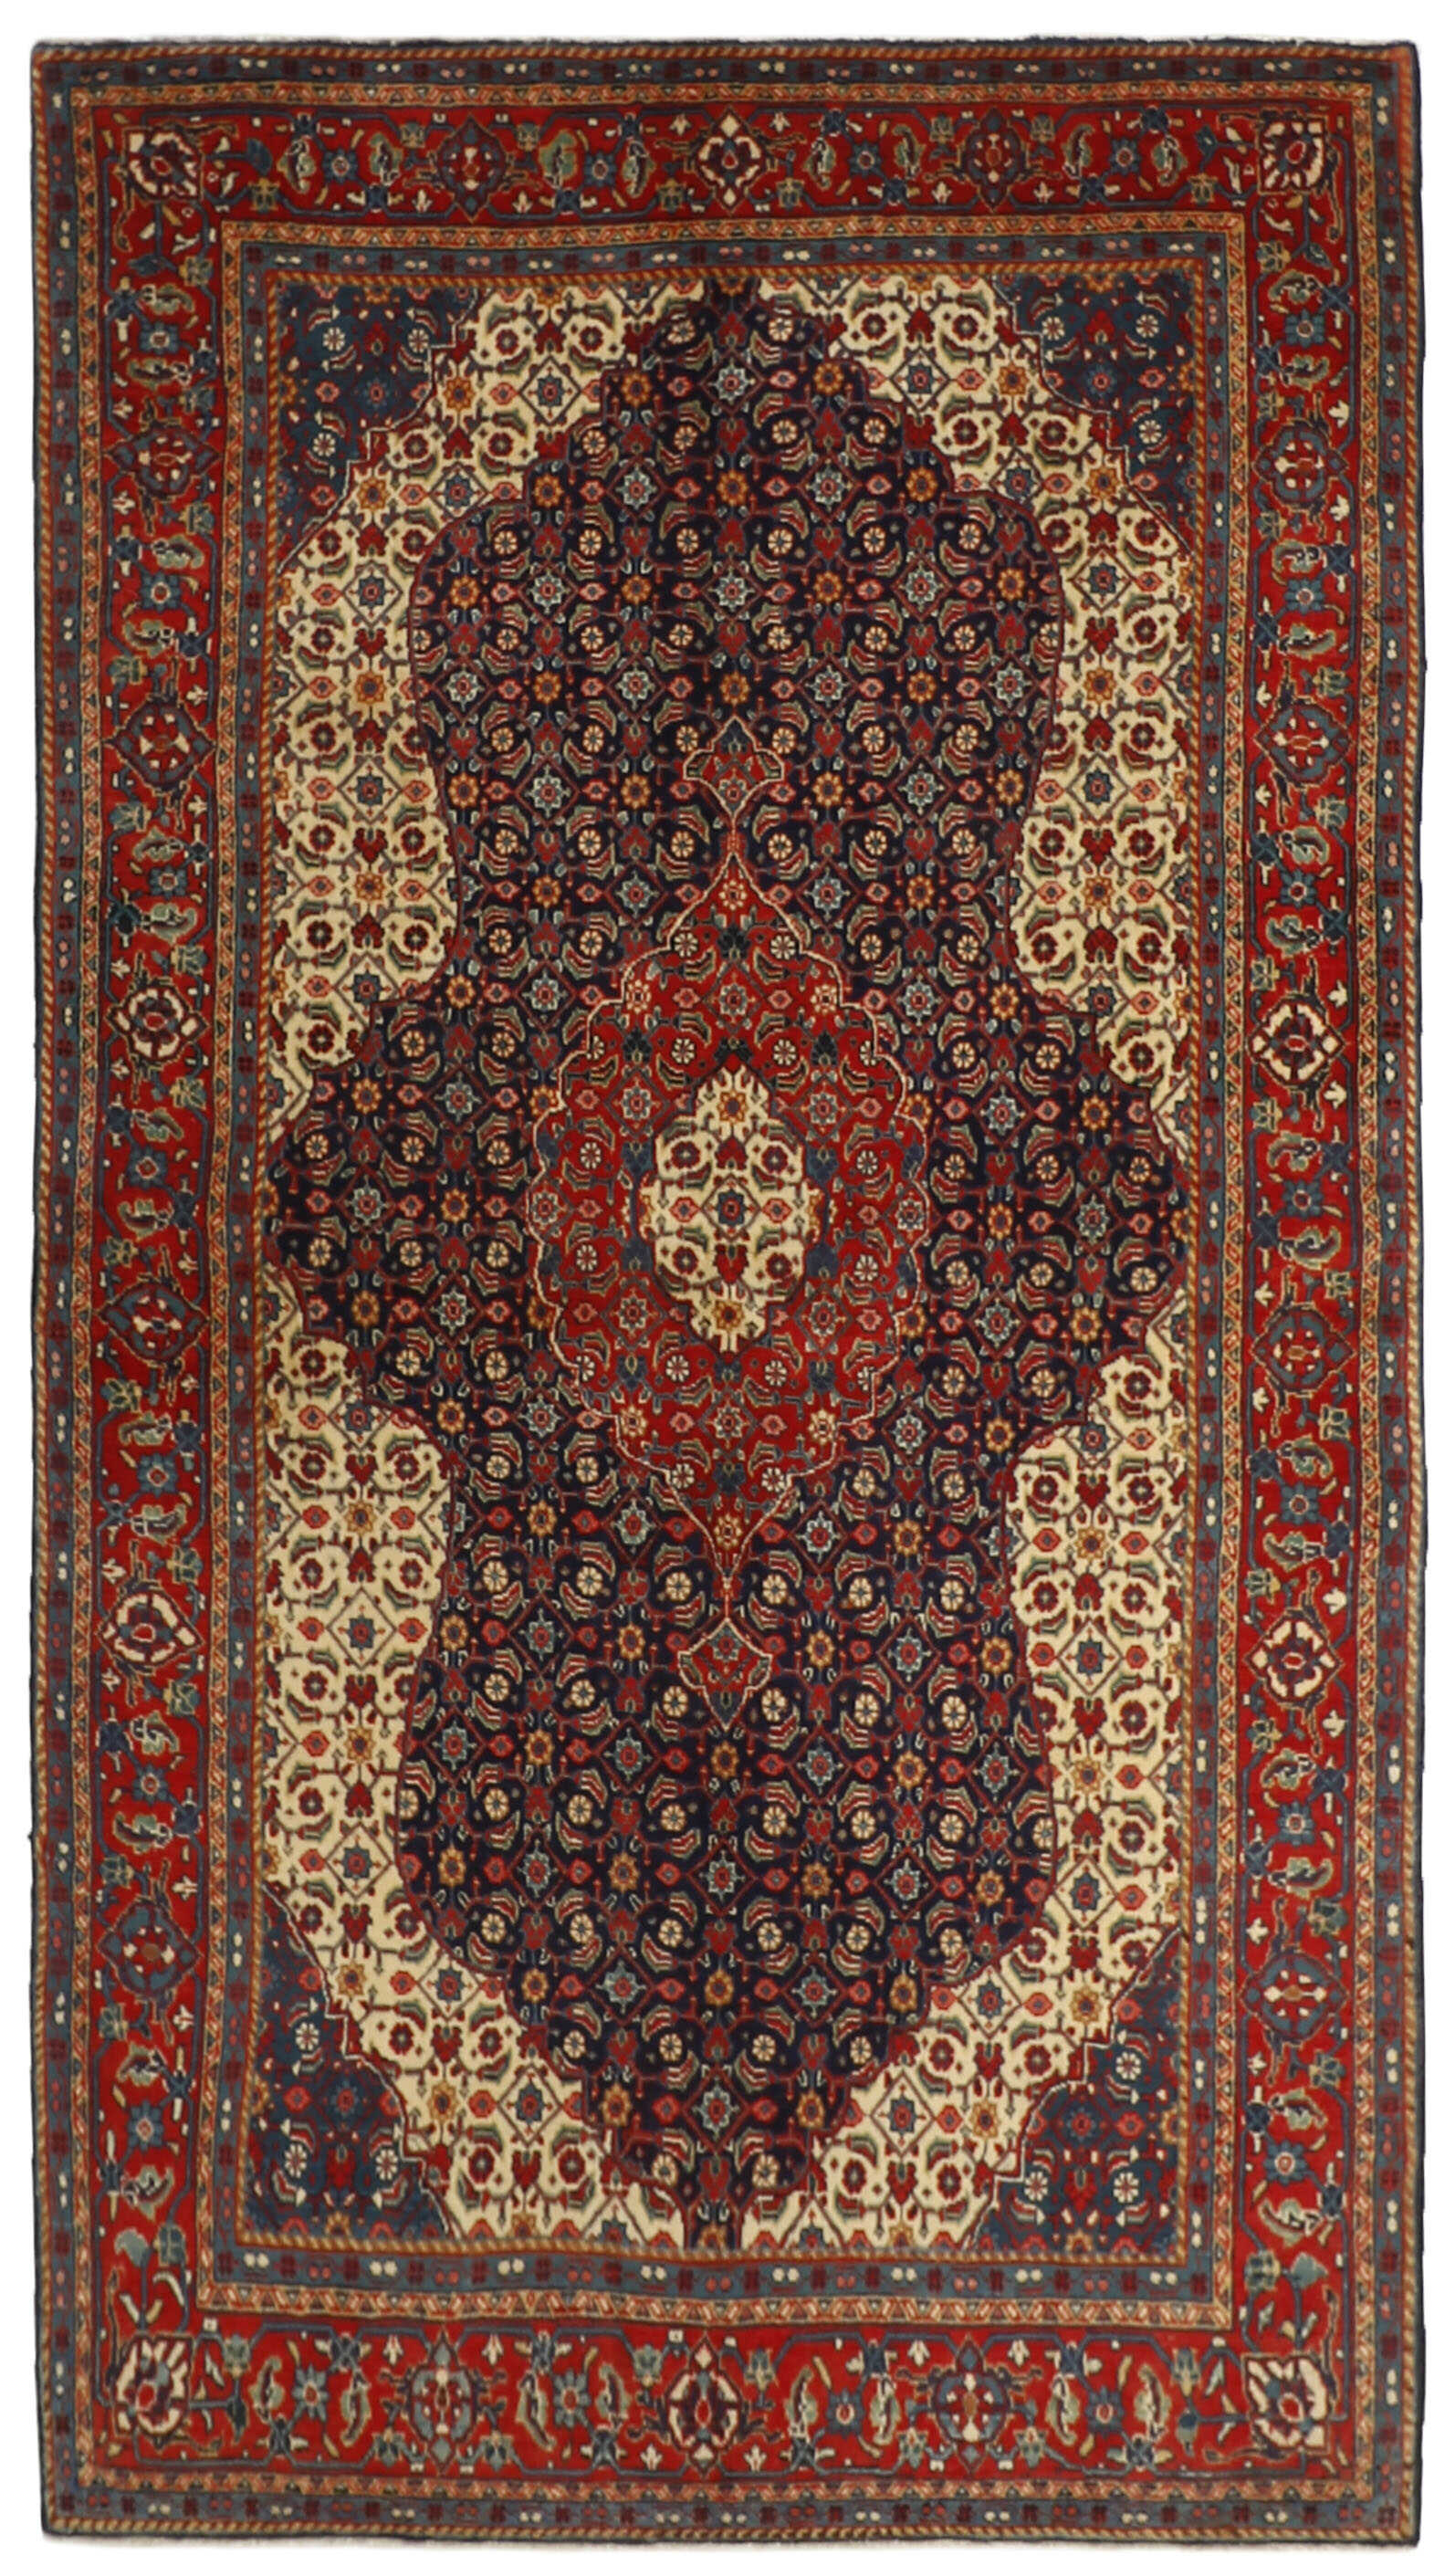 Authentic persian rug with traditional floral design in red, blue and beige